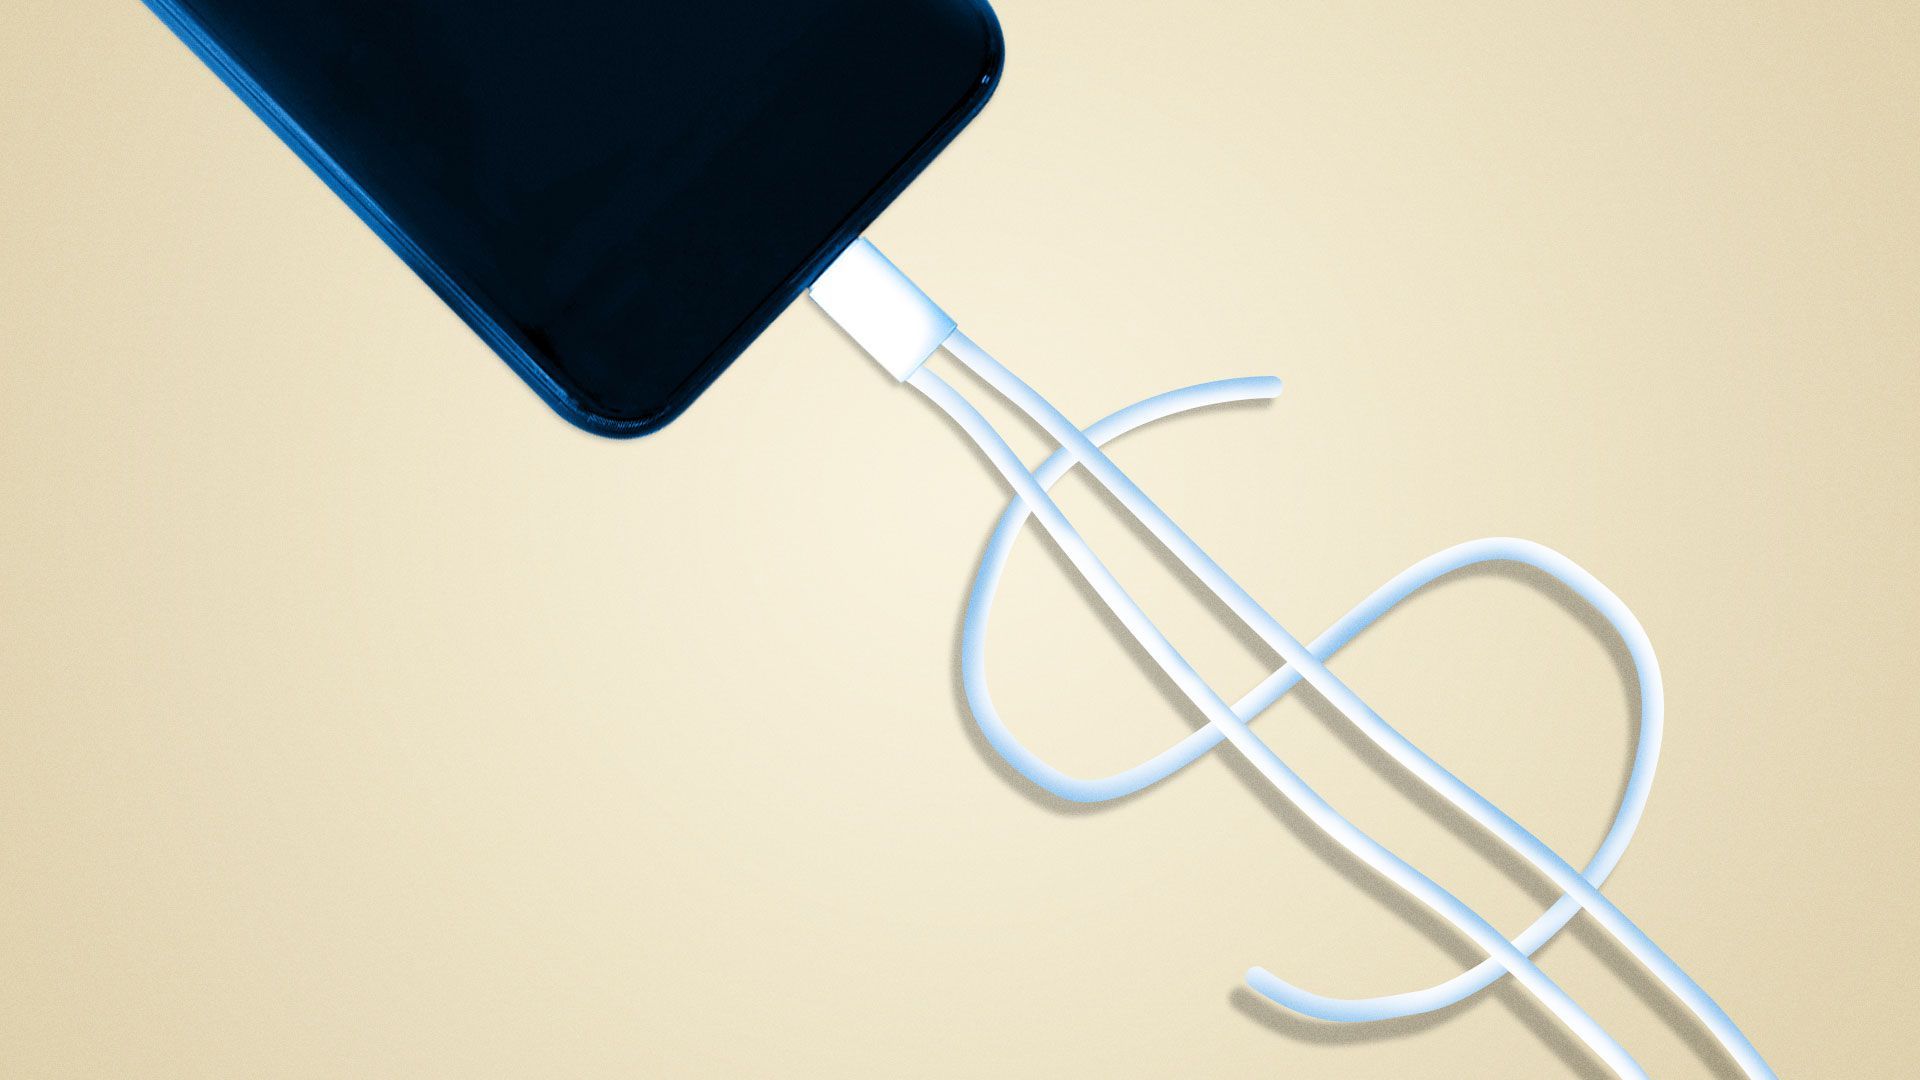 Illustration of a smartphone with a dollar sign cable